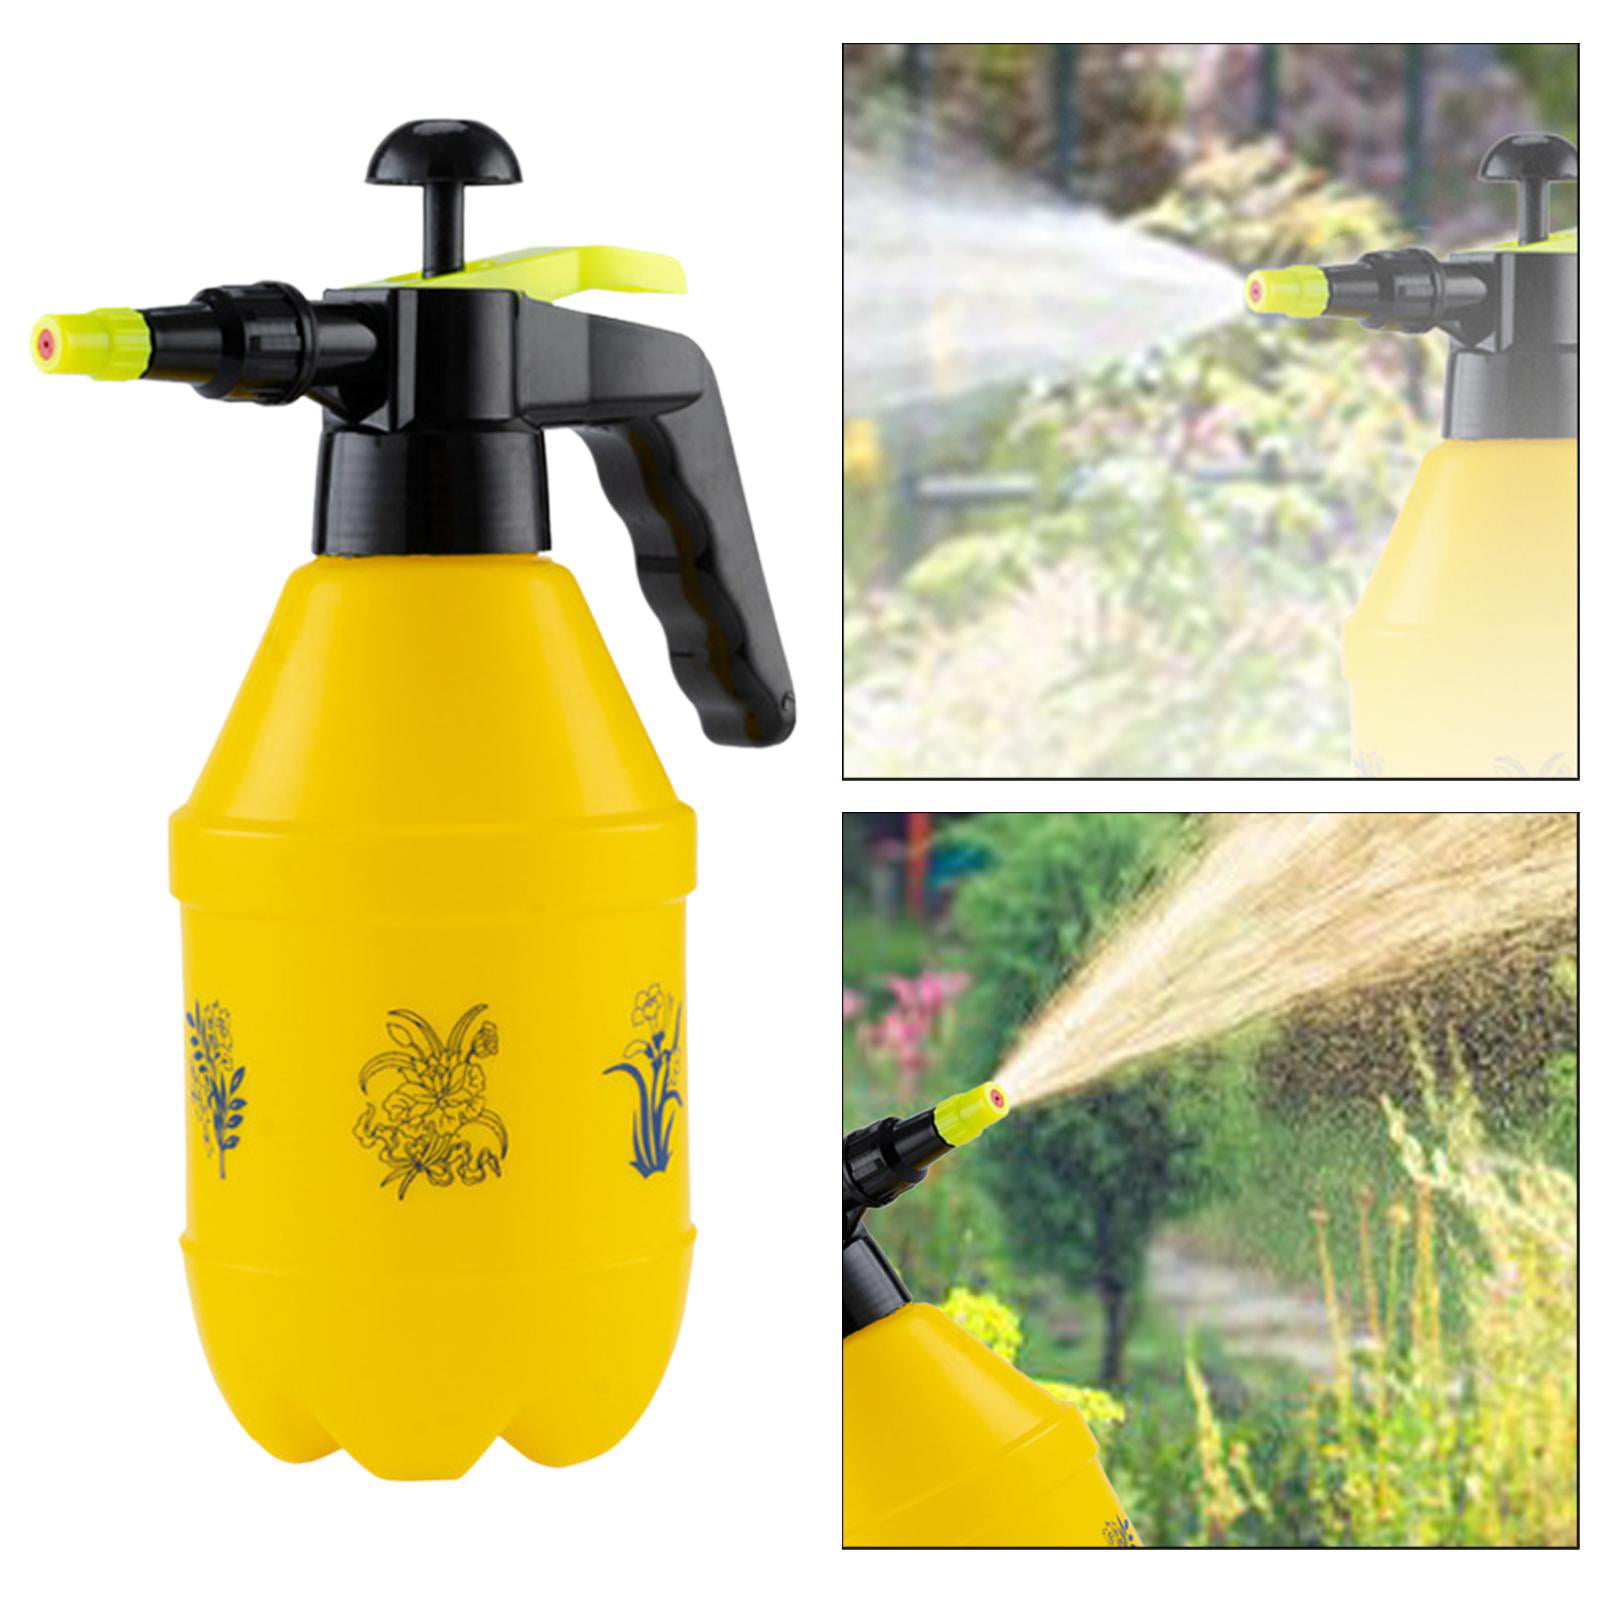 Continuous Hand Pump Pressure Sprayer for Home,Lawn,Garden,Car Detailing  and More,Sprayer with Adjustable Spout for  Gardening,Fertilizing,Cleaning,1L 